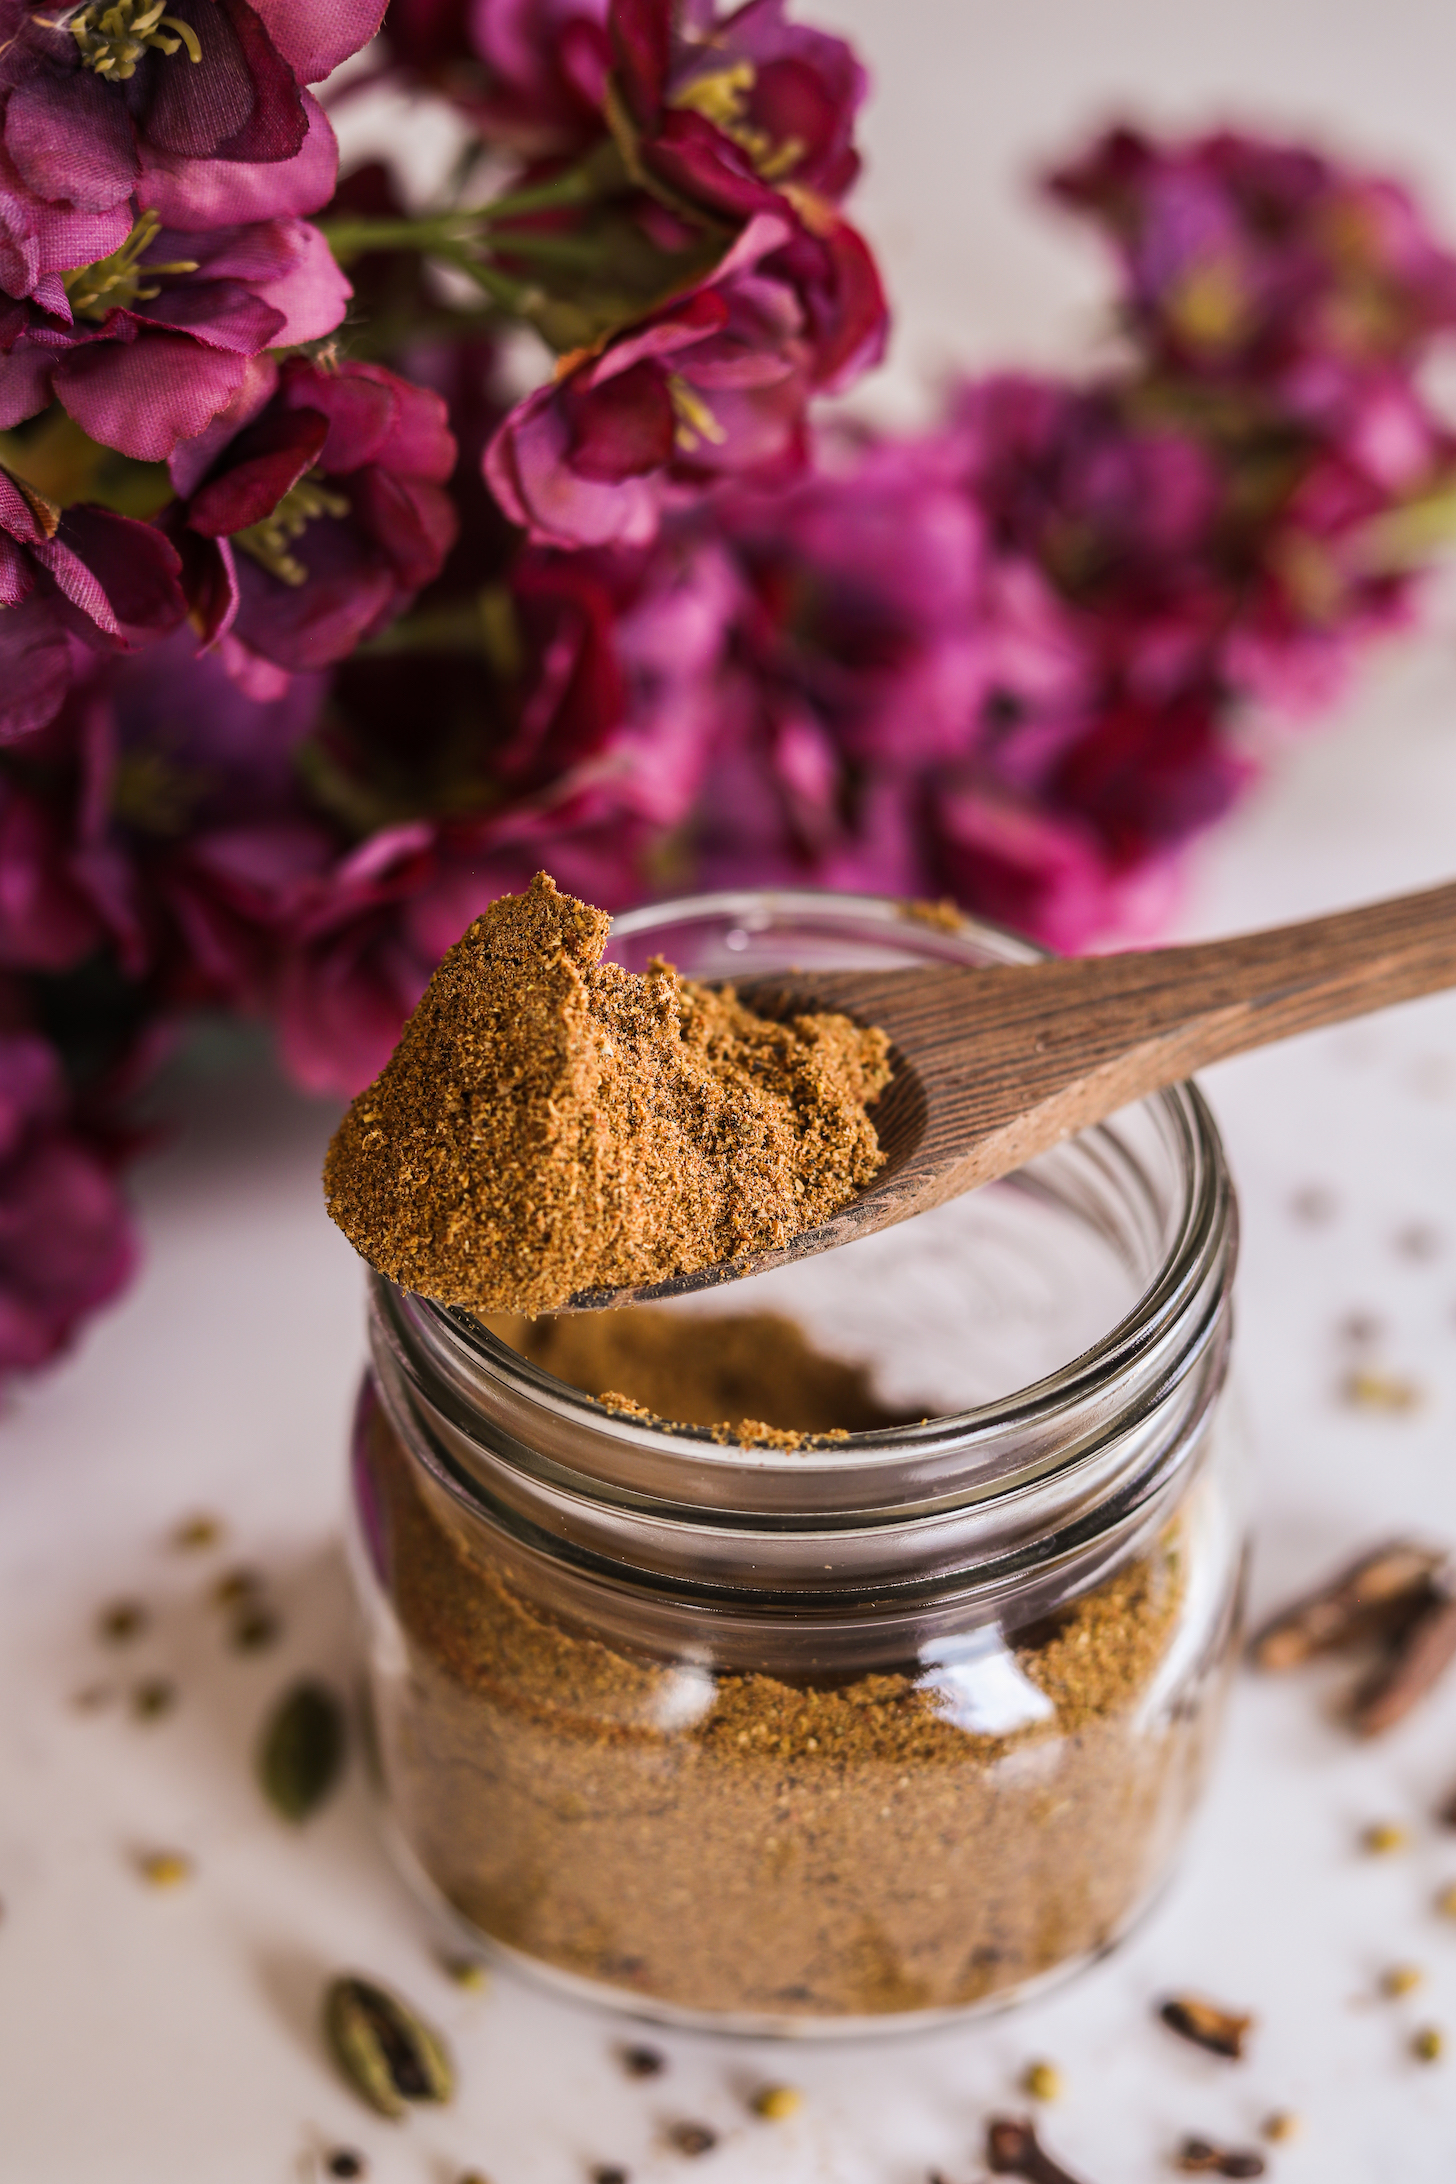 A heaped spoon of brown spice balancing on a mason jar with pink flowers in the background.